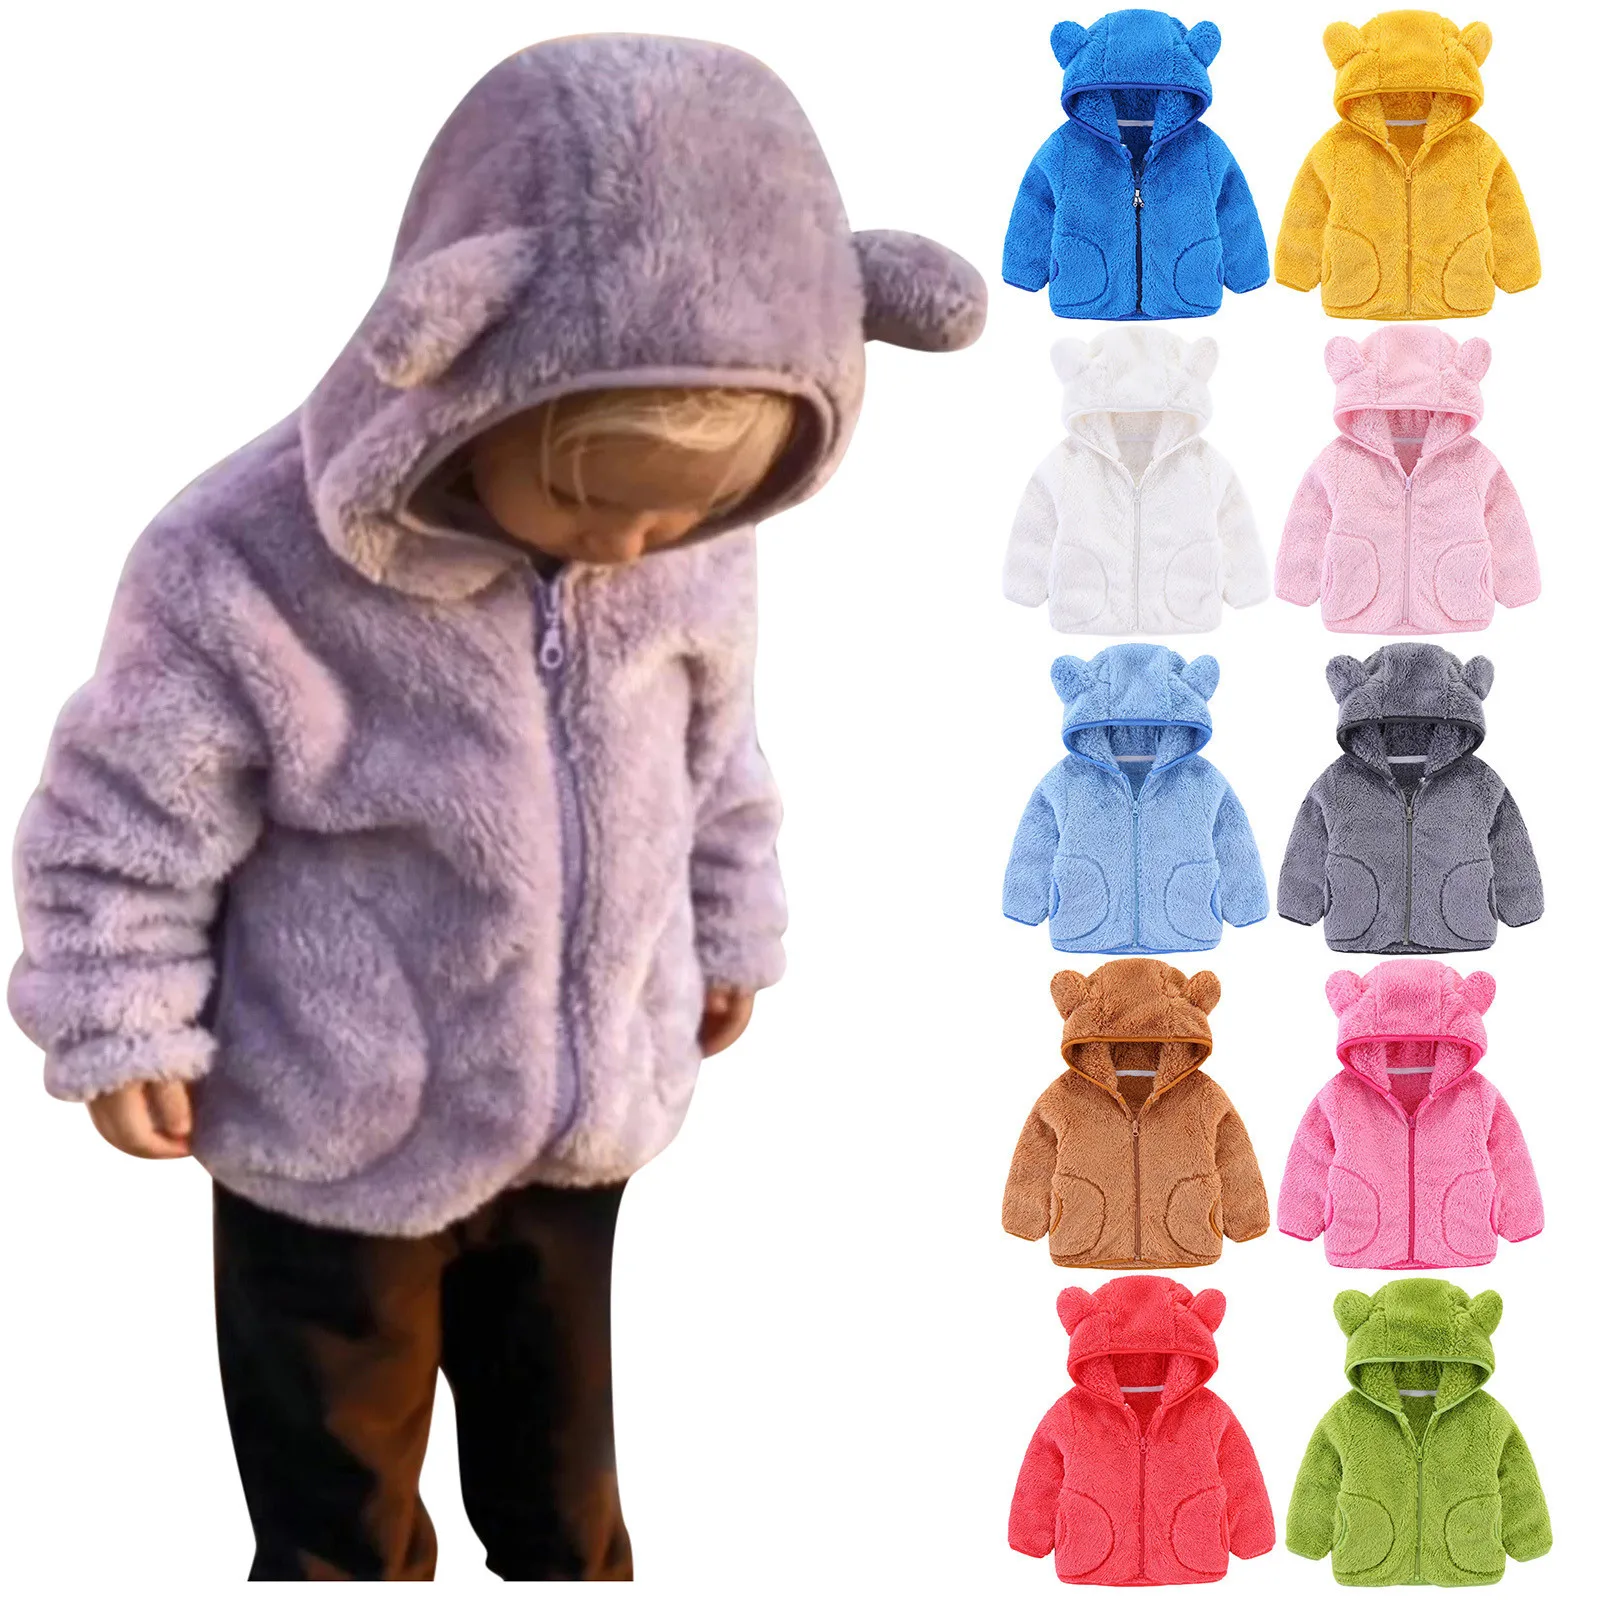 Unisex Toddler Girl Boy Coat Children Candy Color Coral Fleece Zipper Up Hooded Winter Outerwear Jacket with Ears 